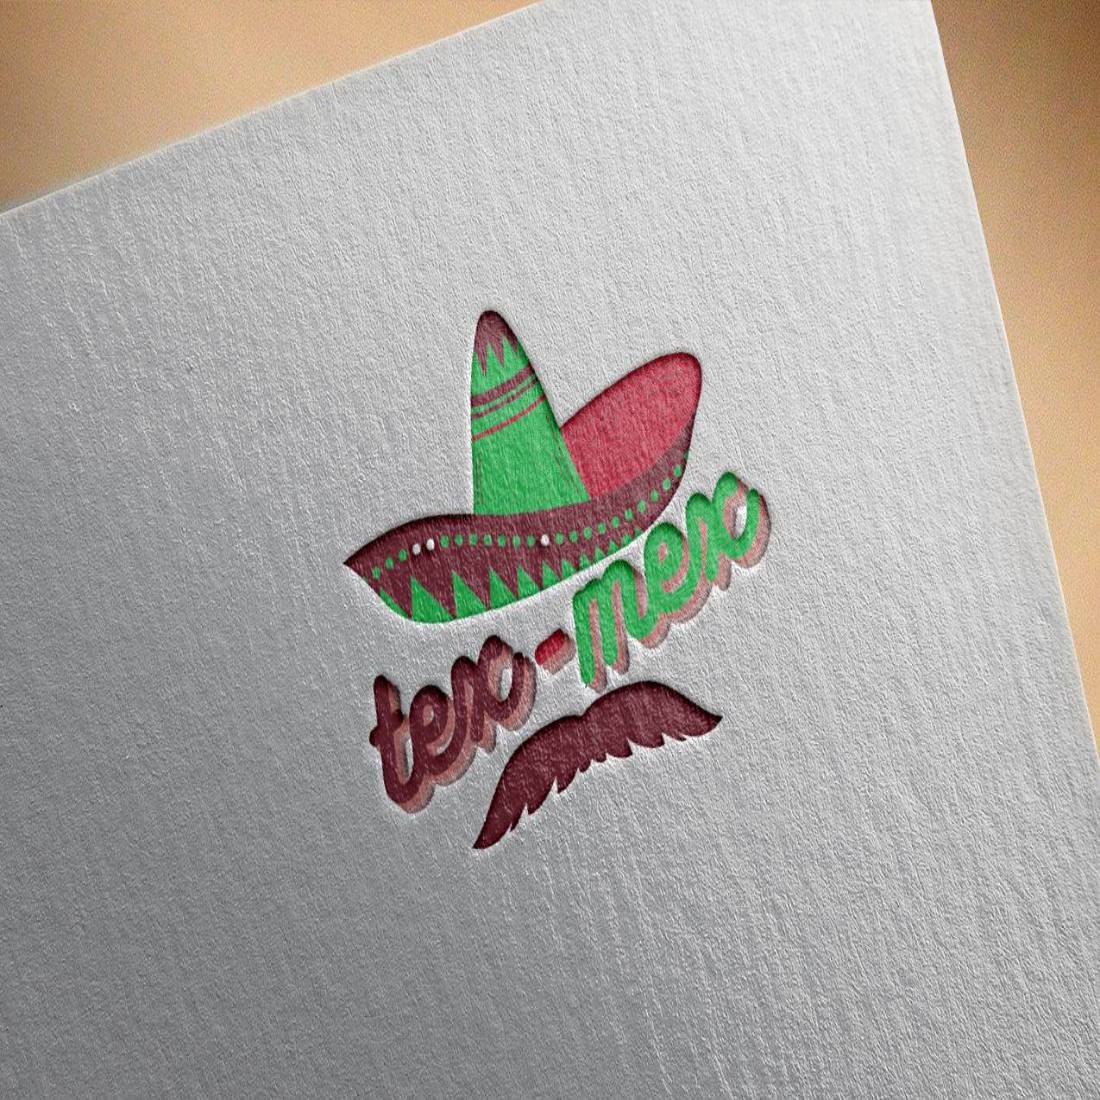 Mexican Food Logo Design cover image.